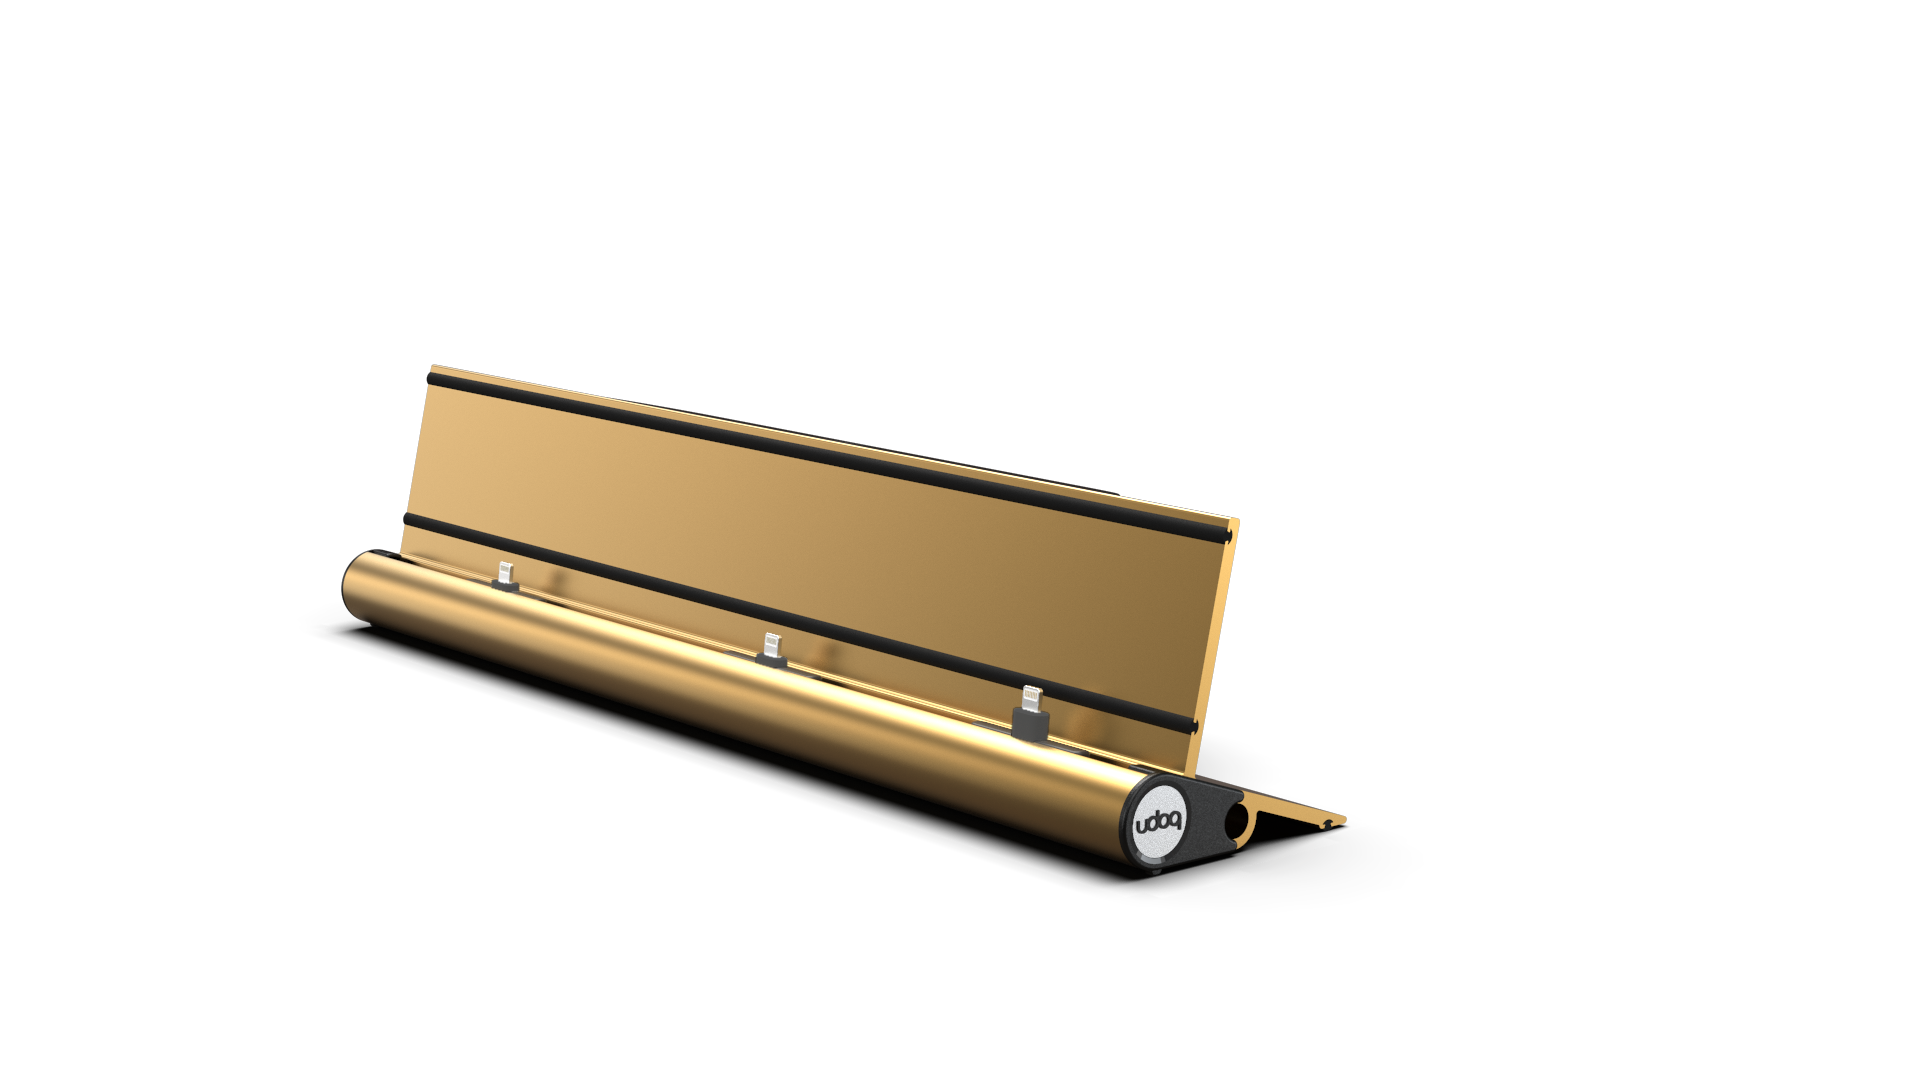 udoq Multi-charging station in gold with Apple Lightning connections